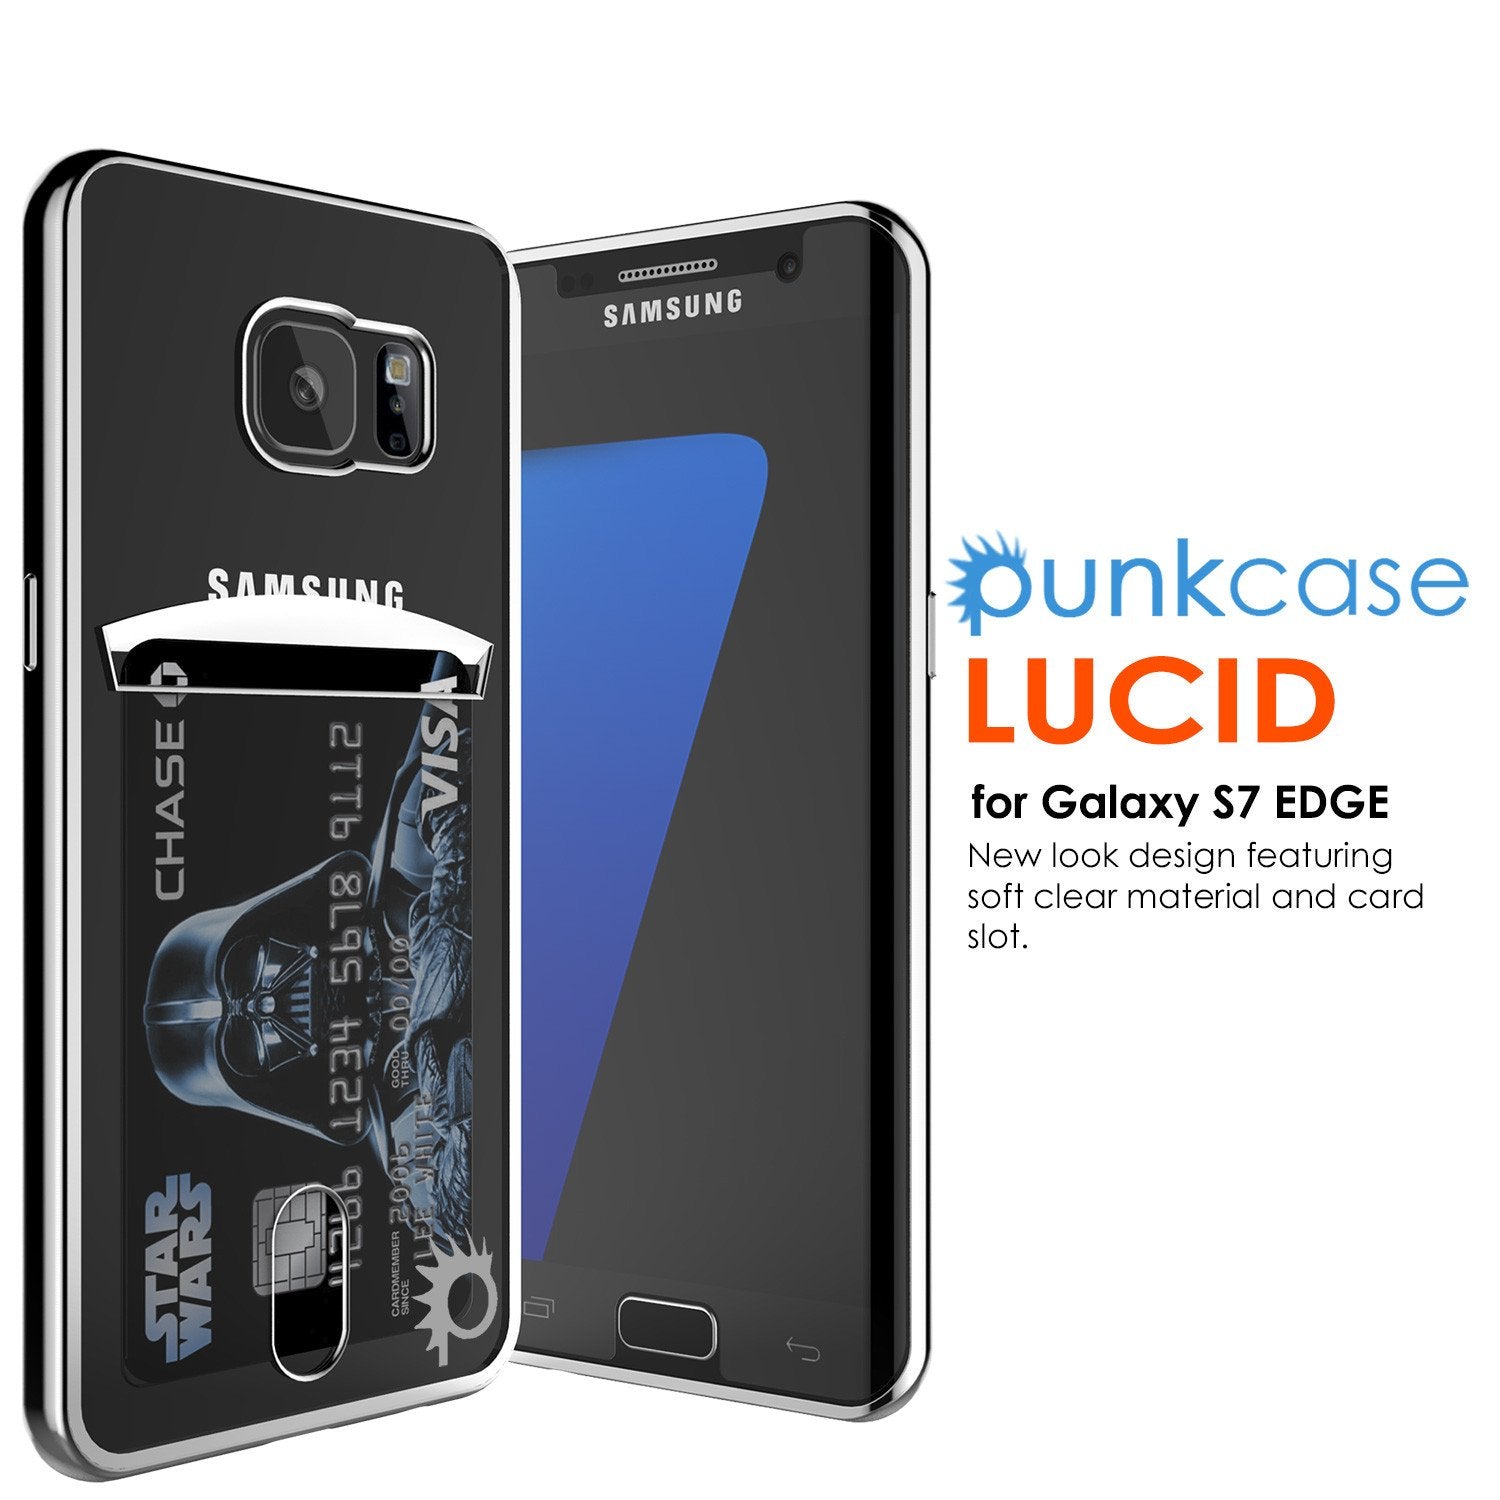 Galaxy S7 EDGE Case, PUNKCASE® LUCID Silver Series | Card Slot | SHIELD Screen Protector | Ultra fit - PunkCase NZ